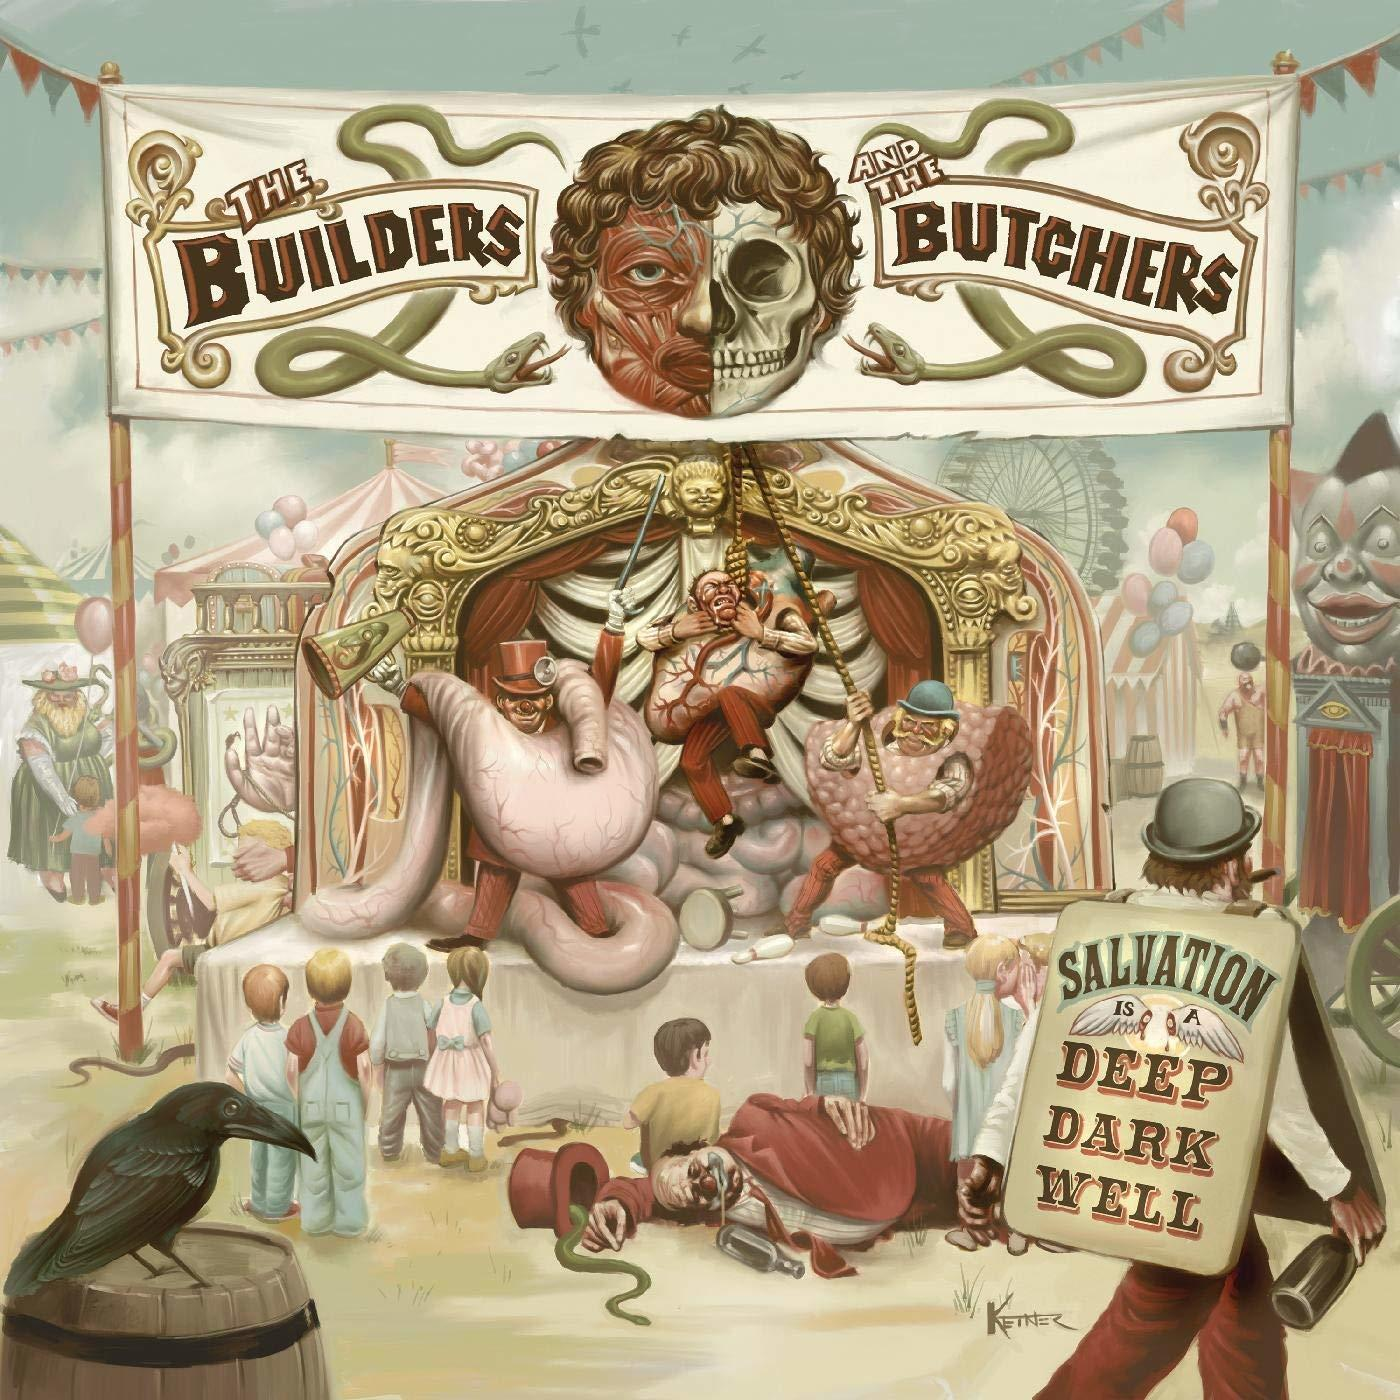 WELL DARK The A IS DEEP - SALVATION (Vinyl) And Butchers The - Builders